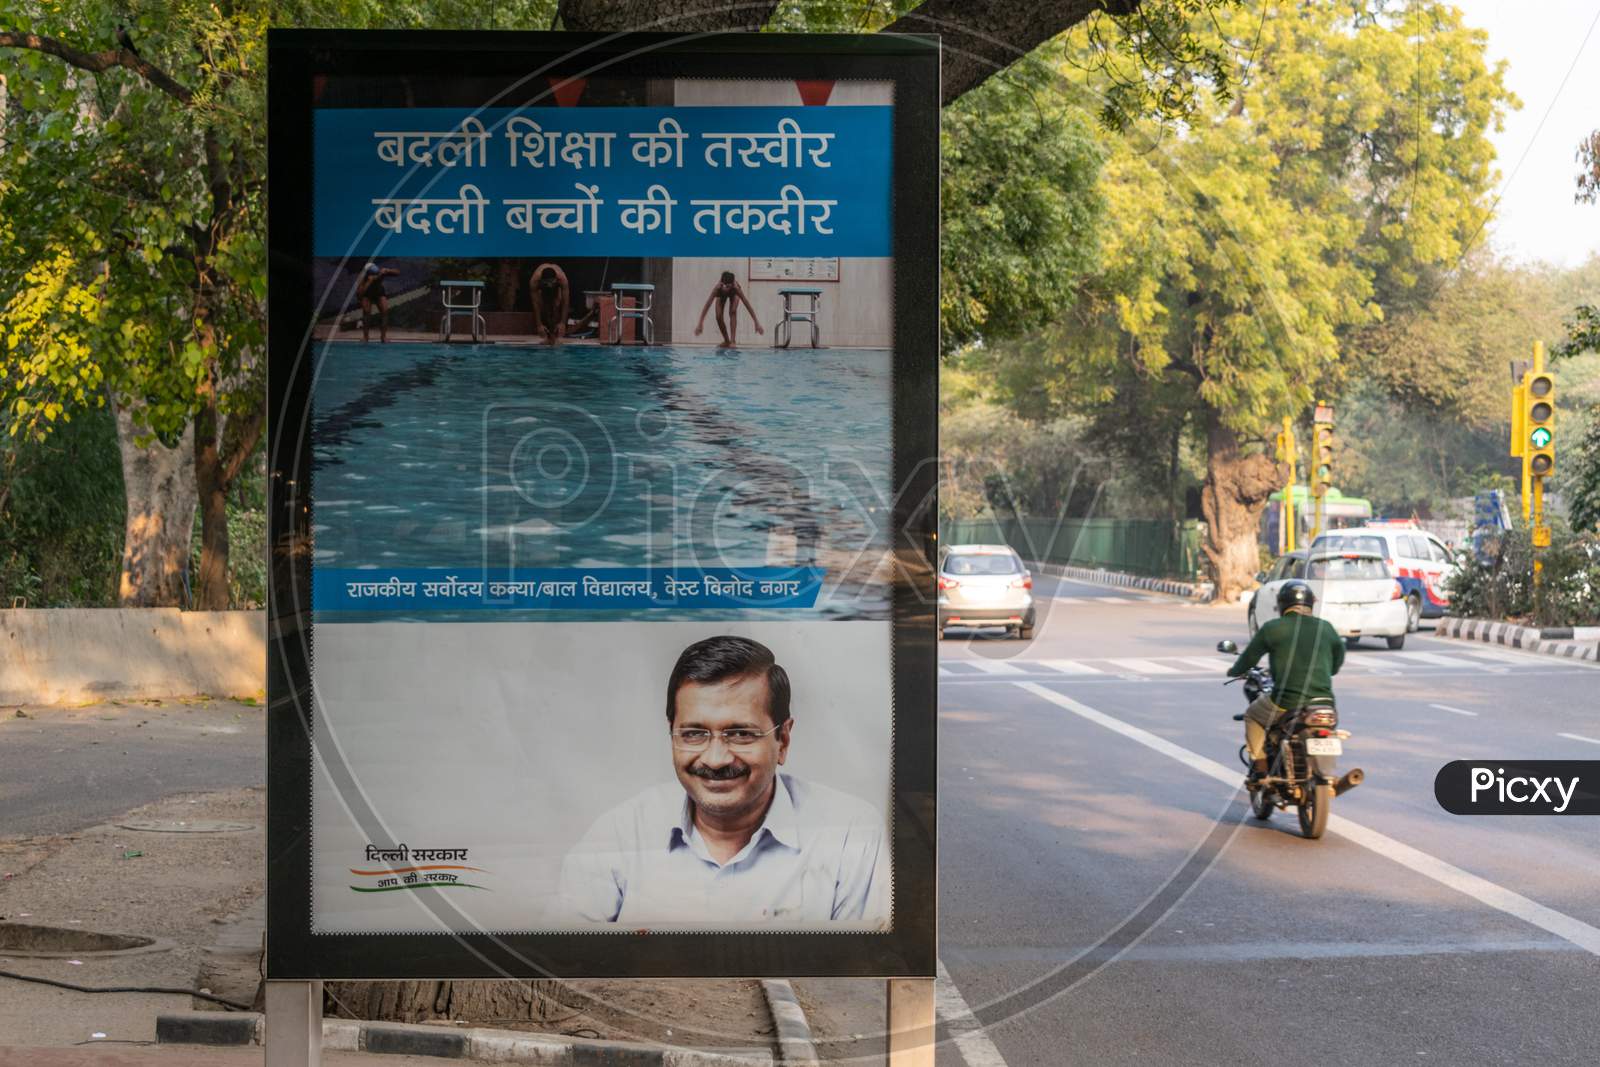 Delhi CM Arvind Kejriwal showing the picture of Education in Delhi in an advertisement